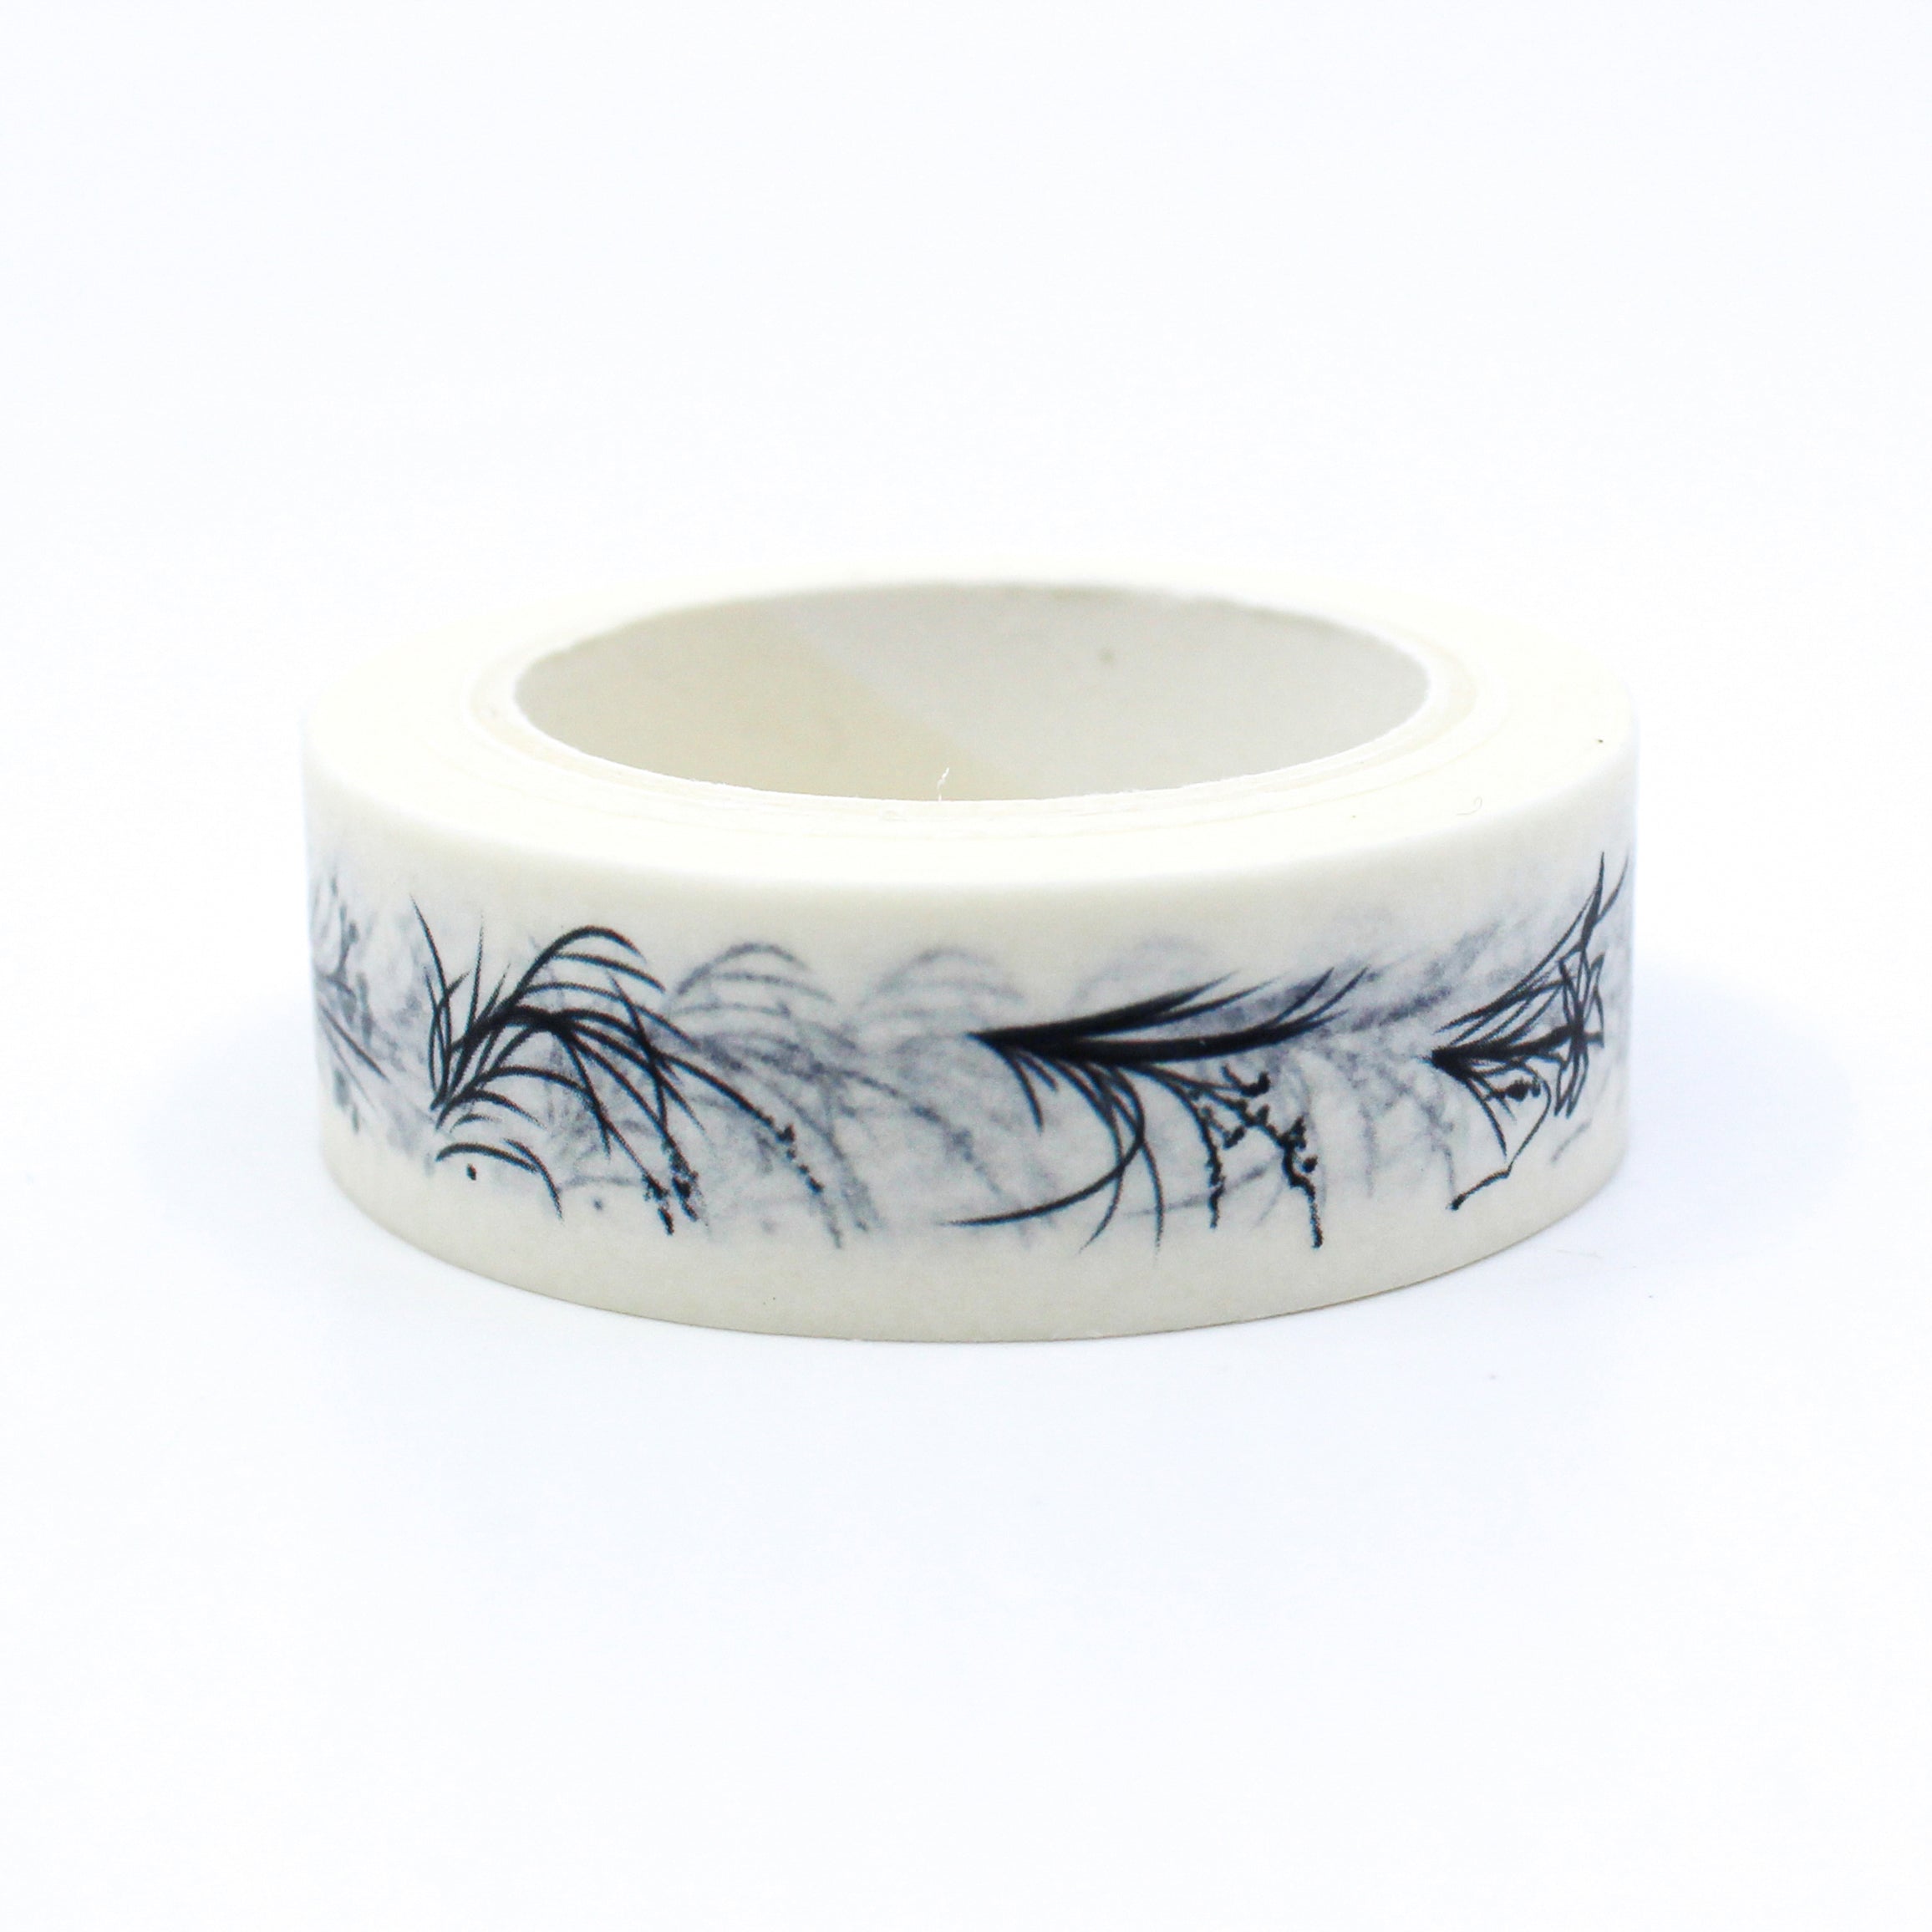 This is thin botanicals branch washi tape from BBB Supplies Craft Shop